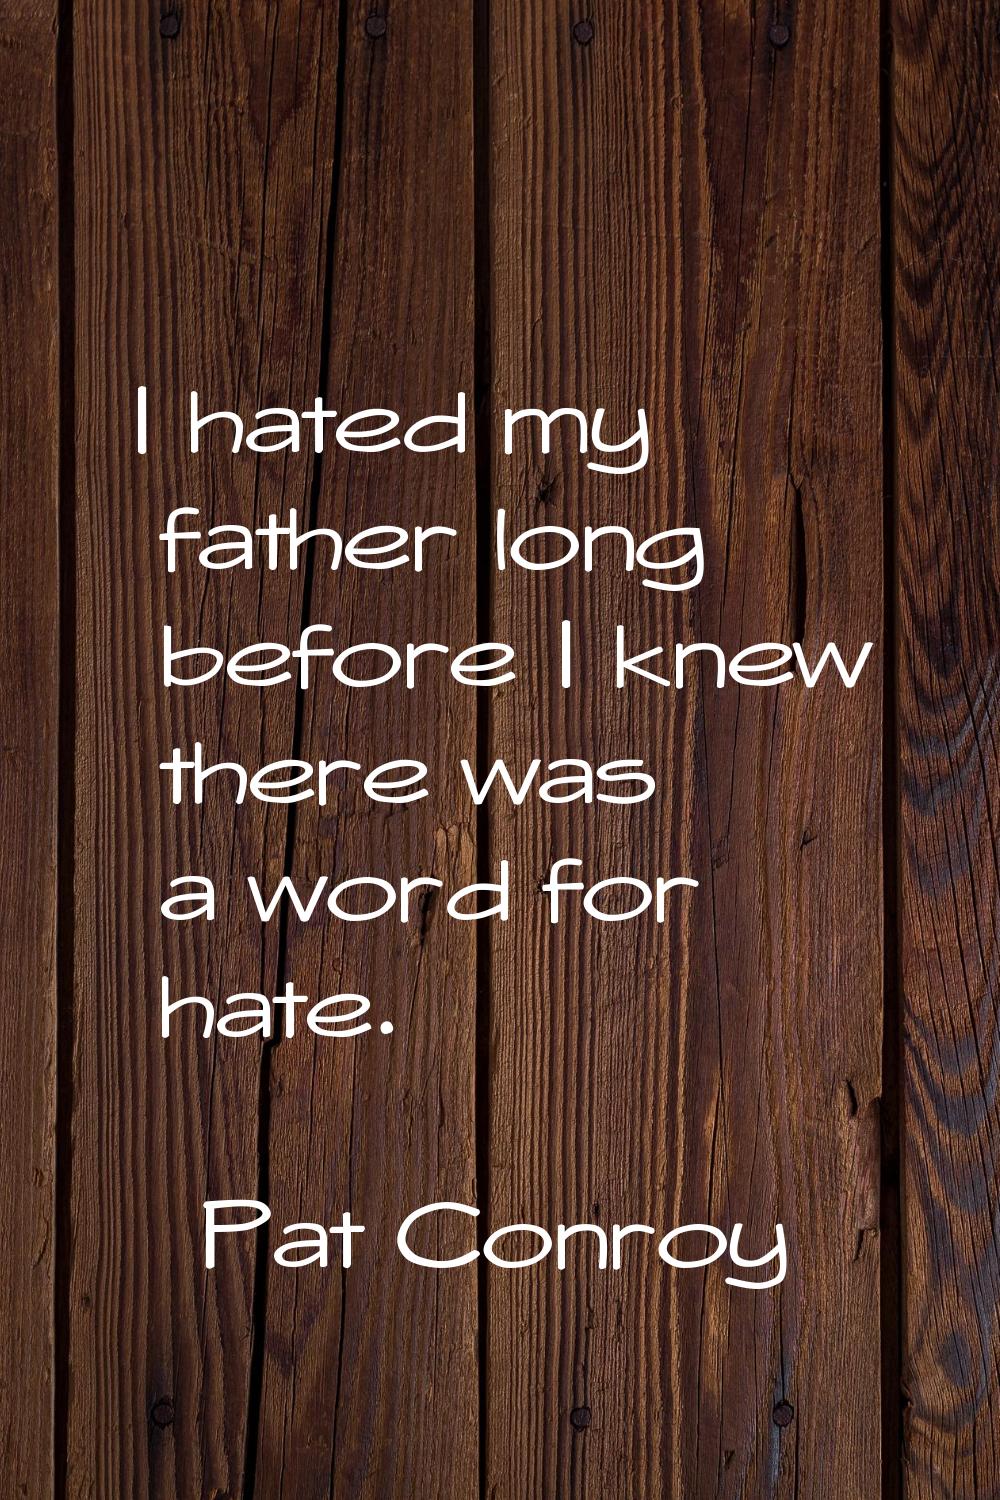 I hated my father long before I knew there was a word for hate.